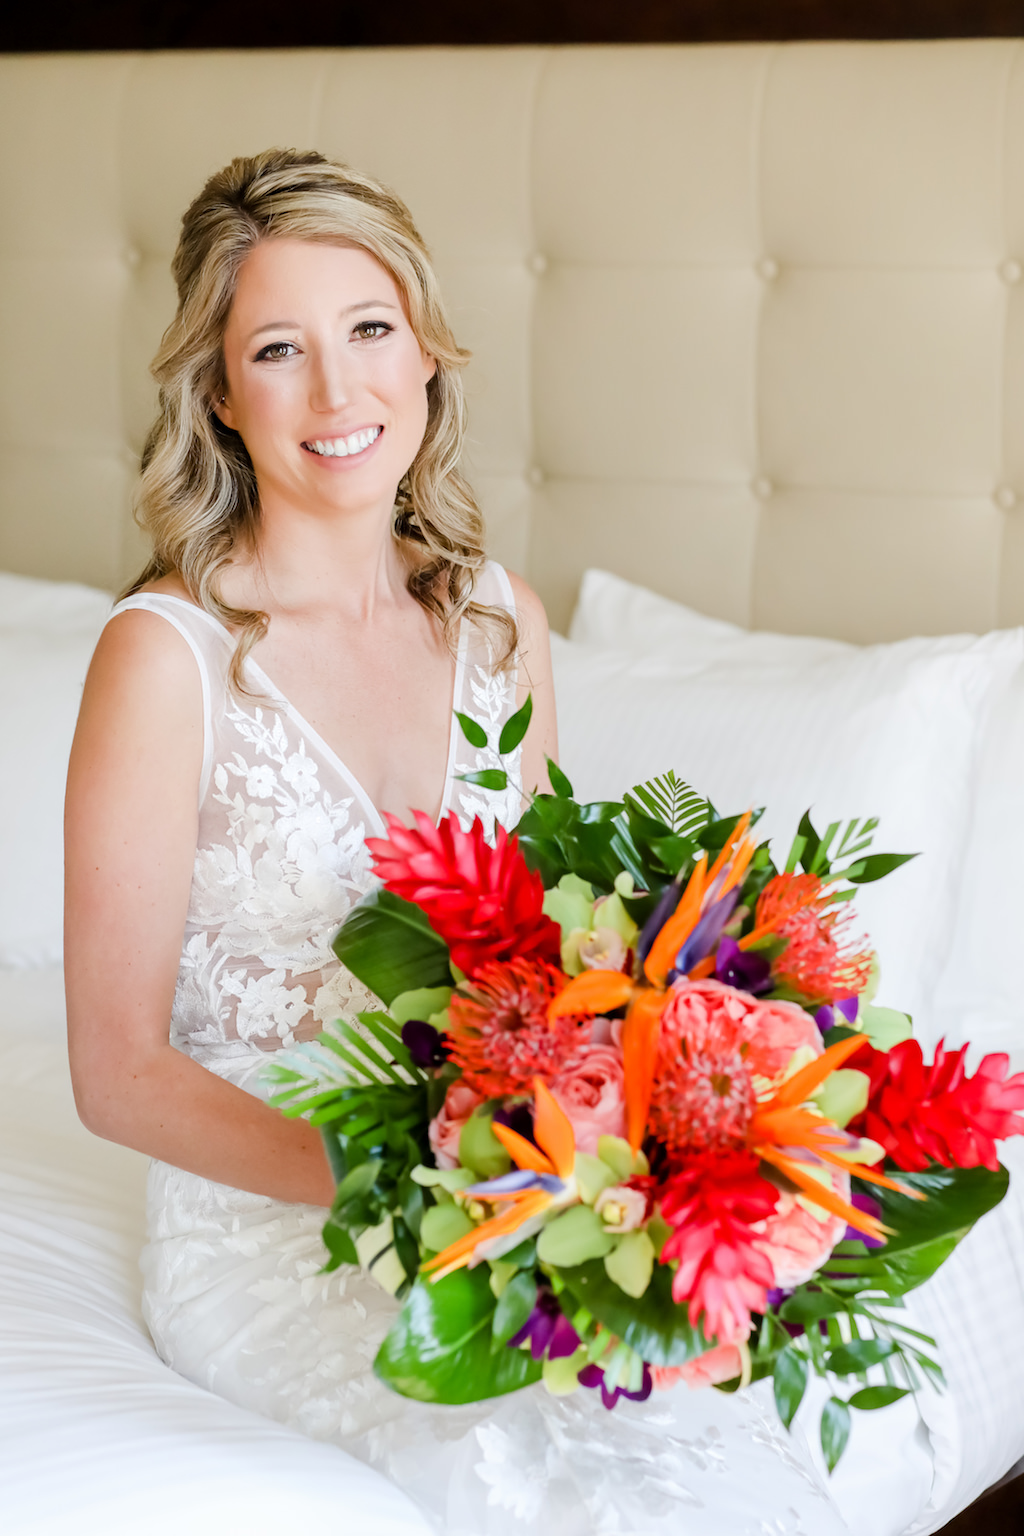 Elegant Florida Bride with Vibrant, Tropical Floral Bouquet with Exotic Flowers, Colorful Island-Inspired Flowers | Tampa Bay Wedding Photographer Lifelong Photography Studios | Tampa Bay Wedding Hair and Makeup Artist Michele Renee The Studio 